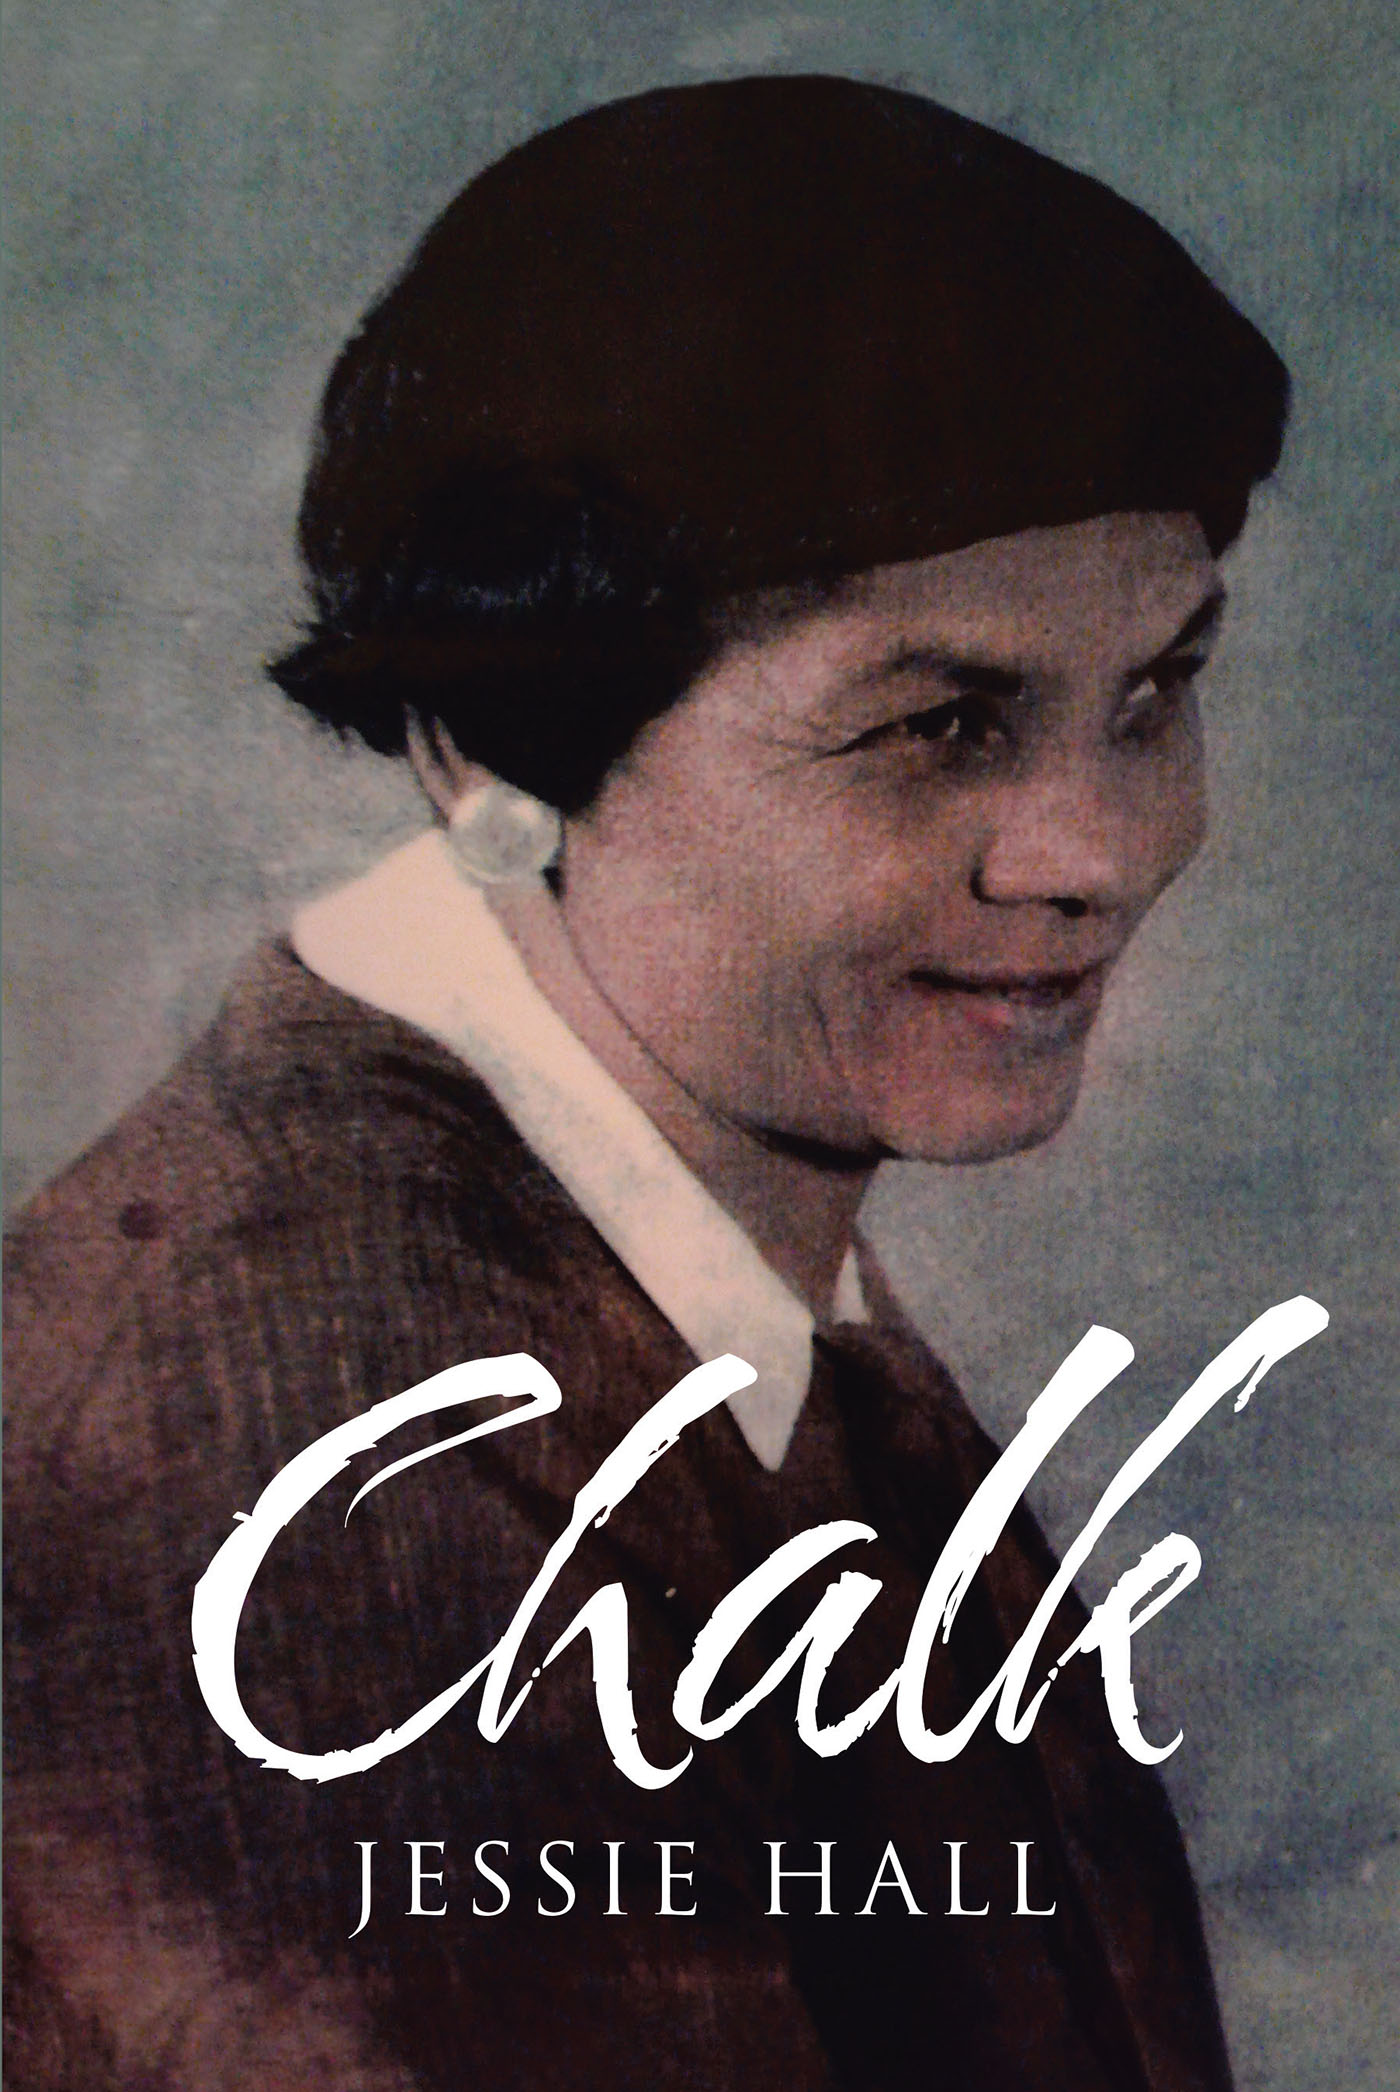 Chalk Cover Image